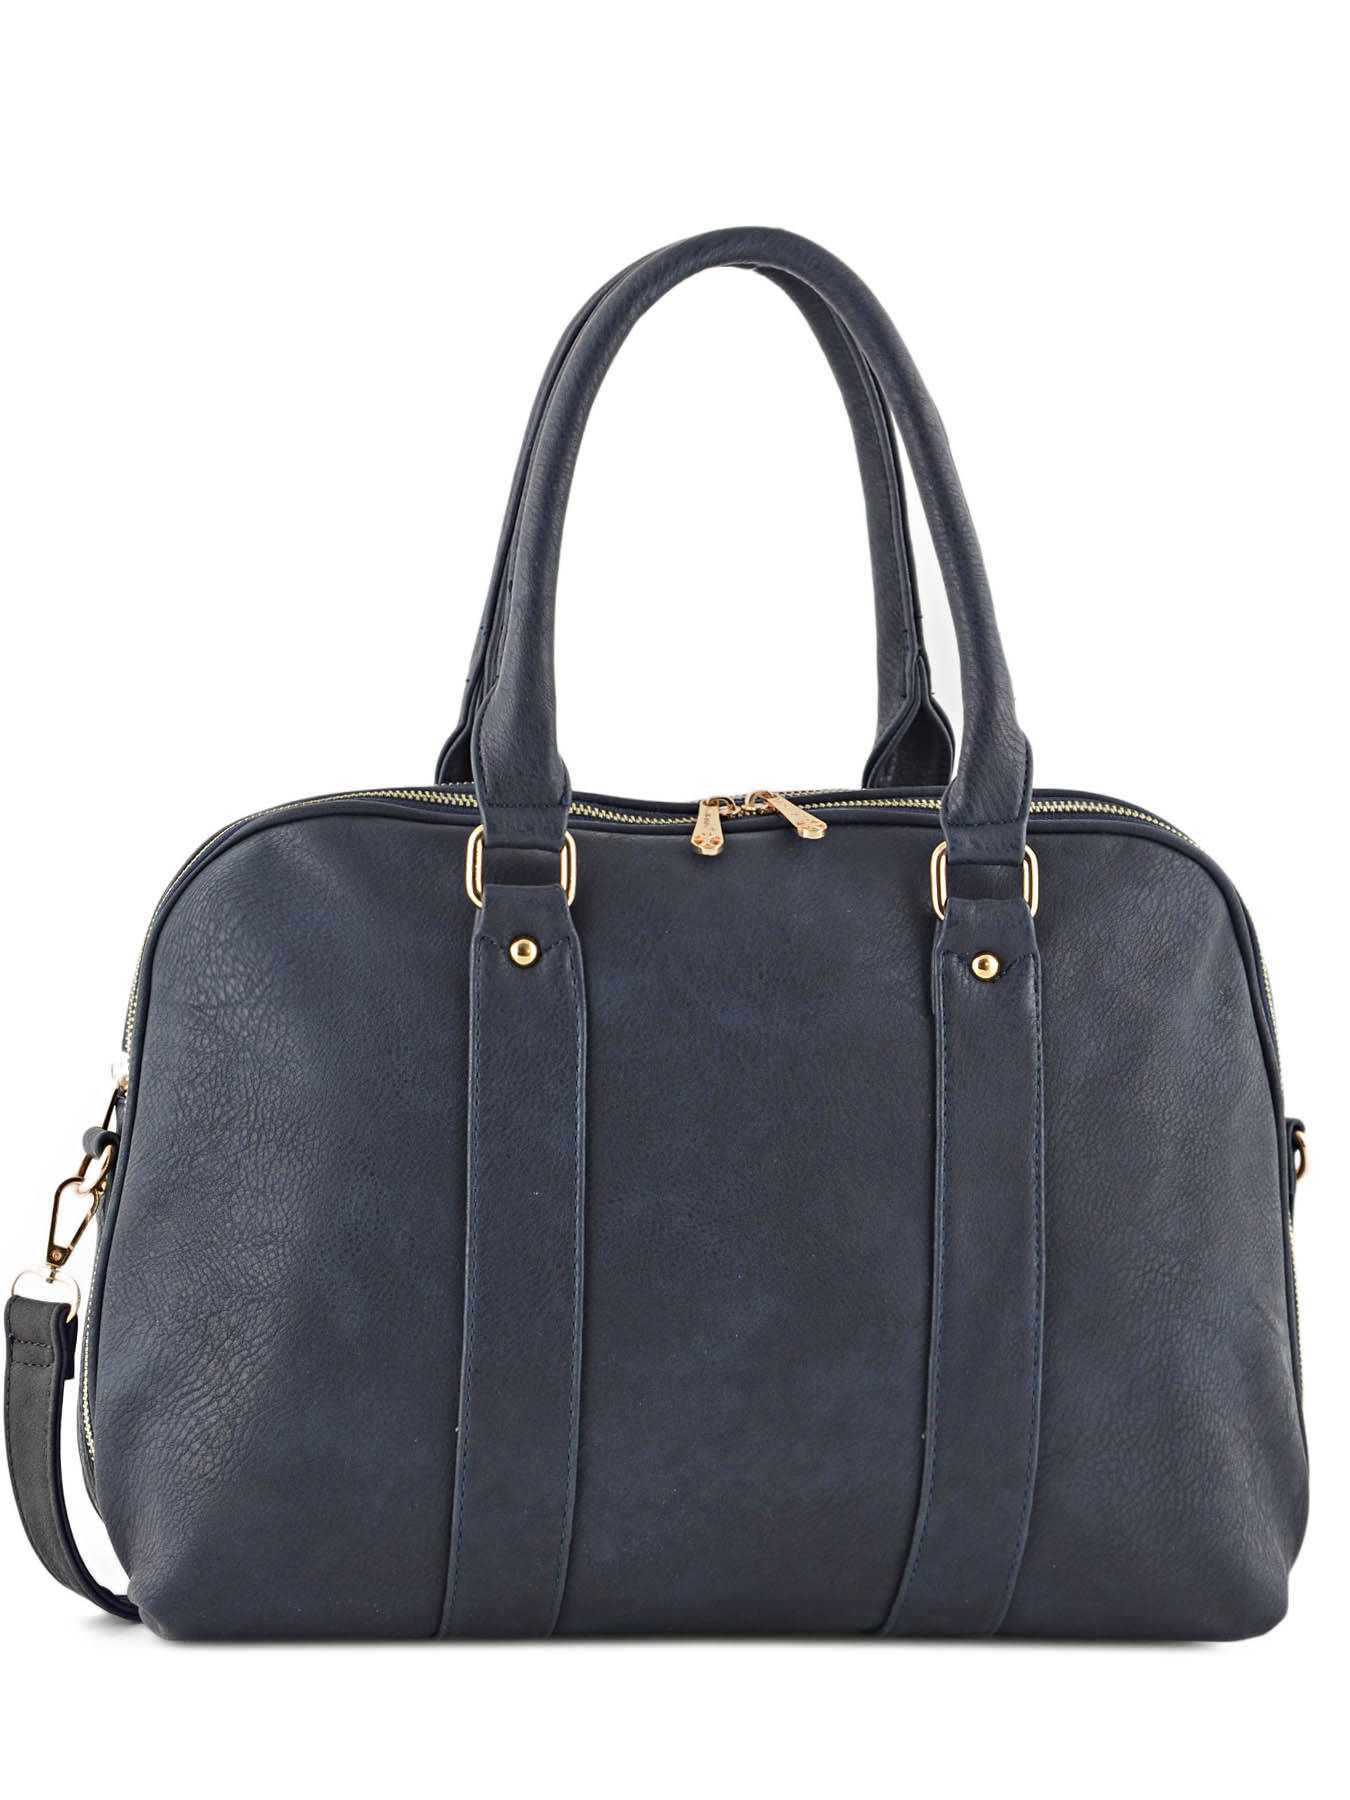 Gallantry Shoulder bag F.528 - free shipping available